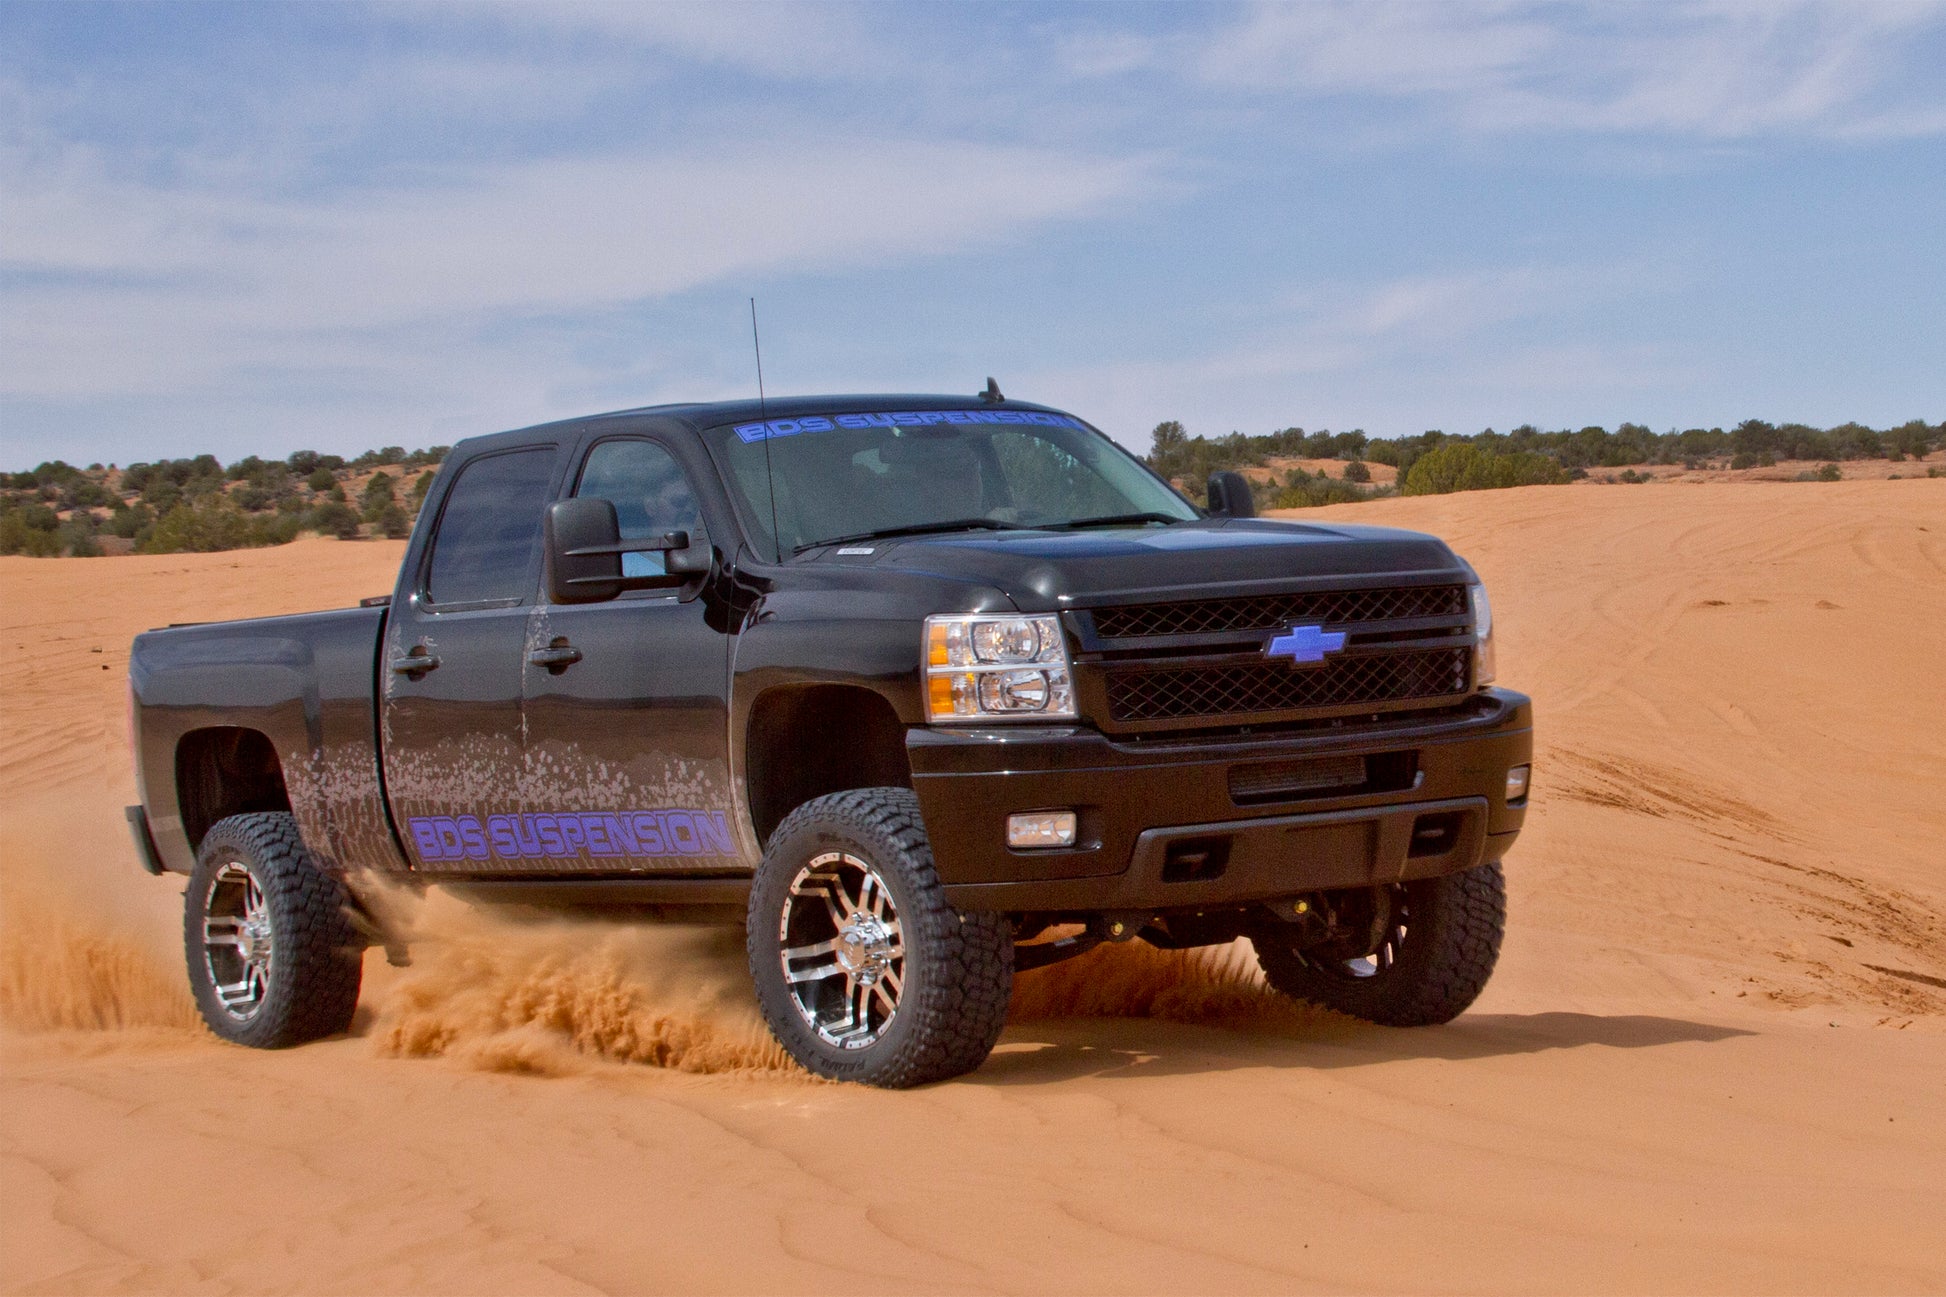 BDS 4.5" Lift Kit for 2011-2019 Chevy Silverado 2500 with Fox 2.0 Shocks - Outback Kitters